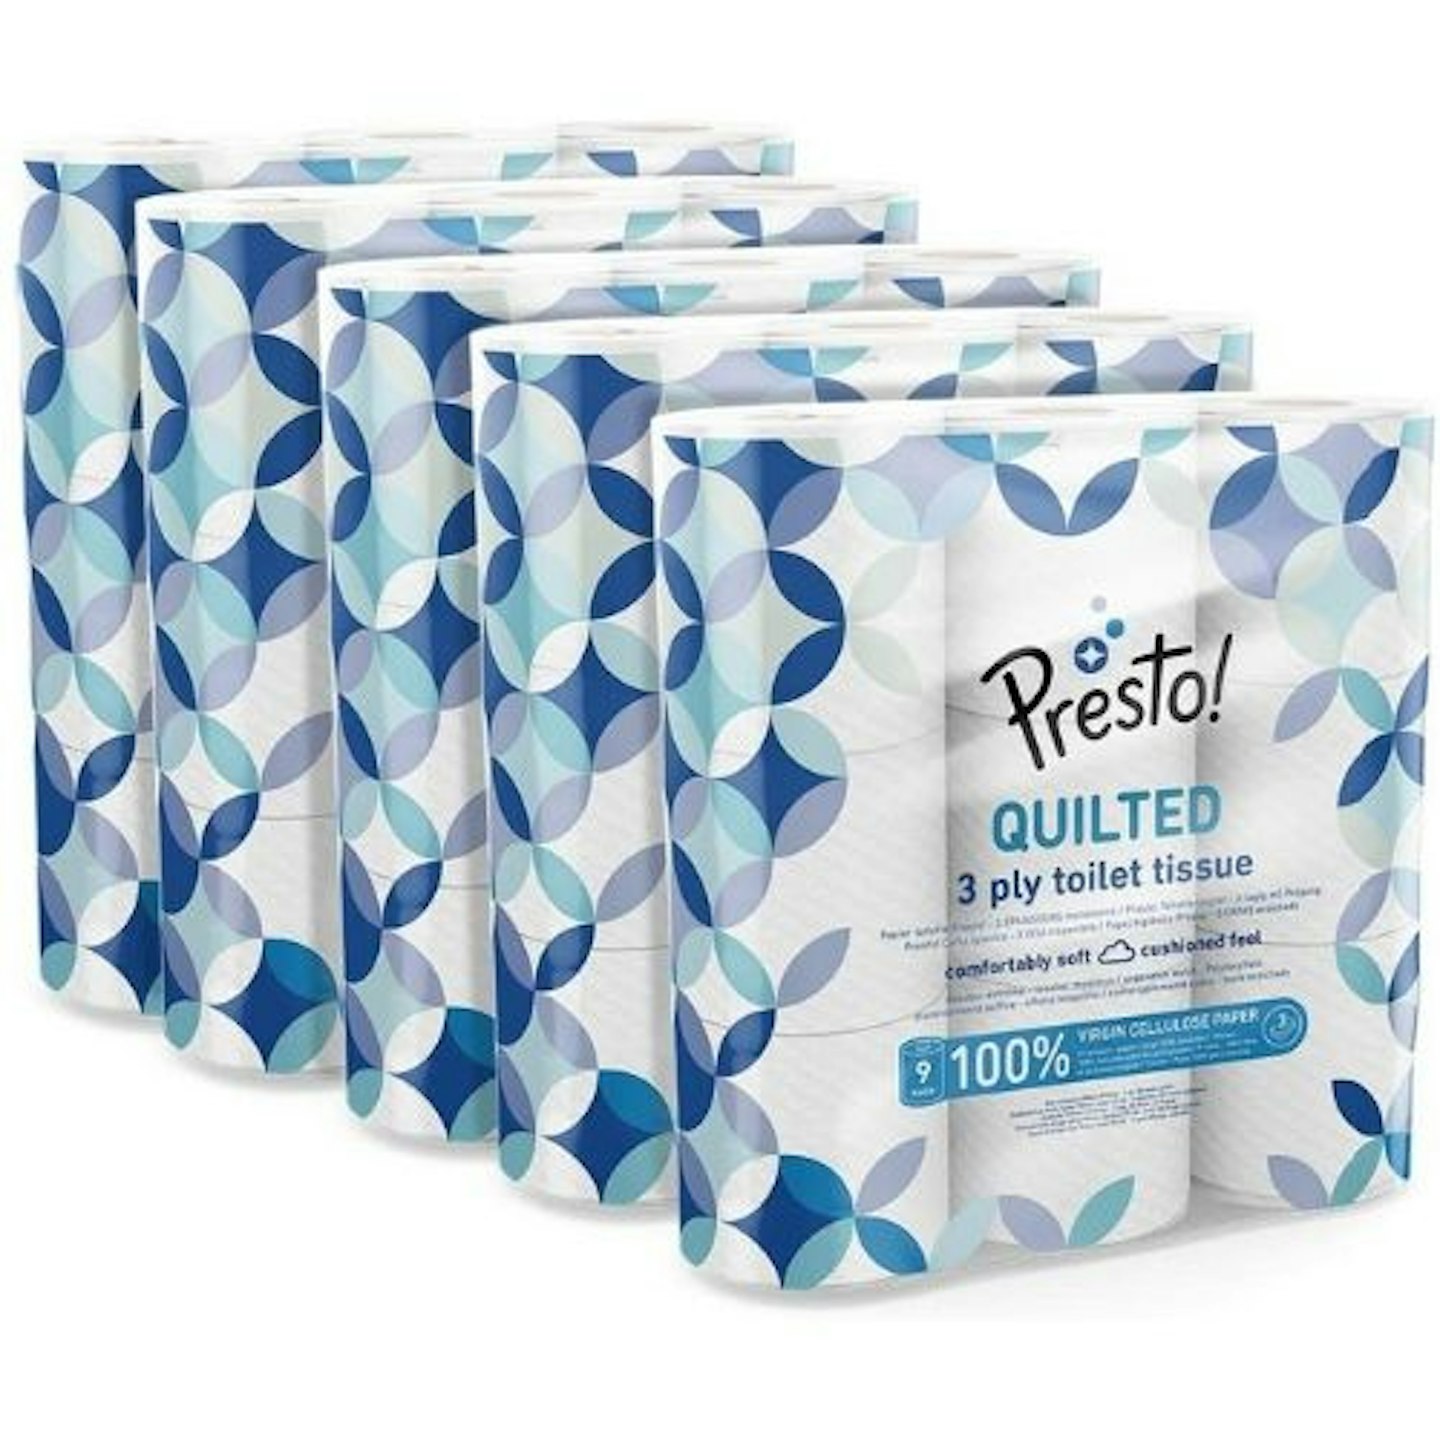 Amazon Brand - Presto! 3-Ply Quilted Toilet Tissues